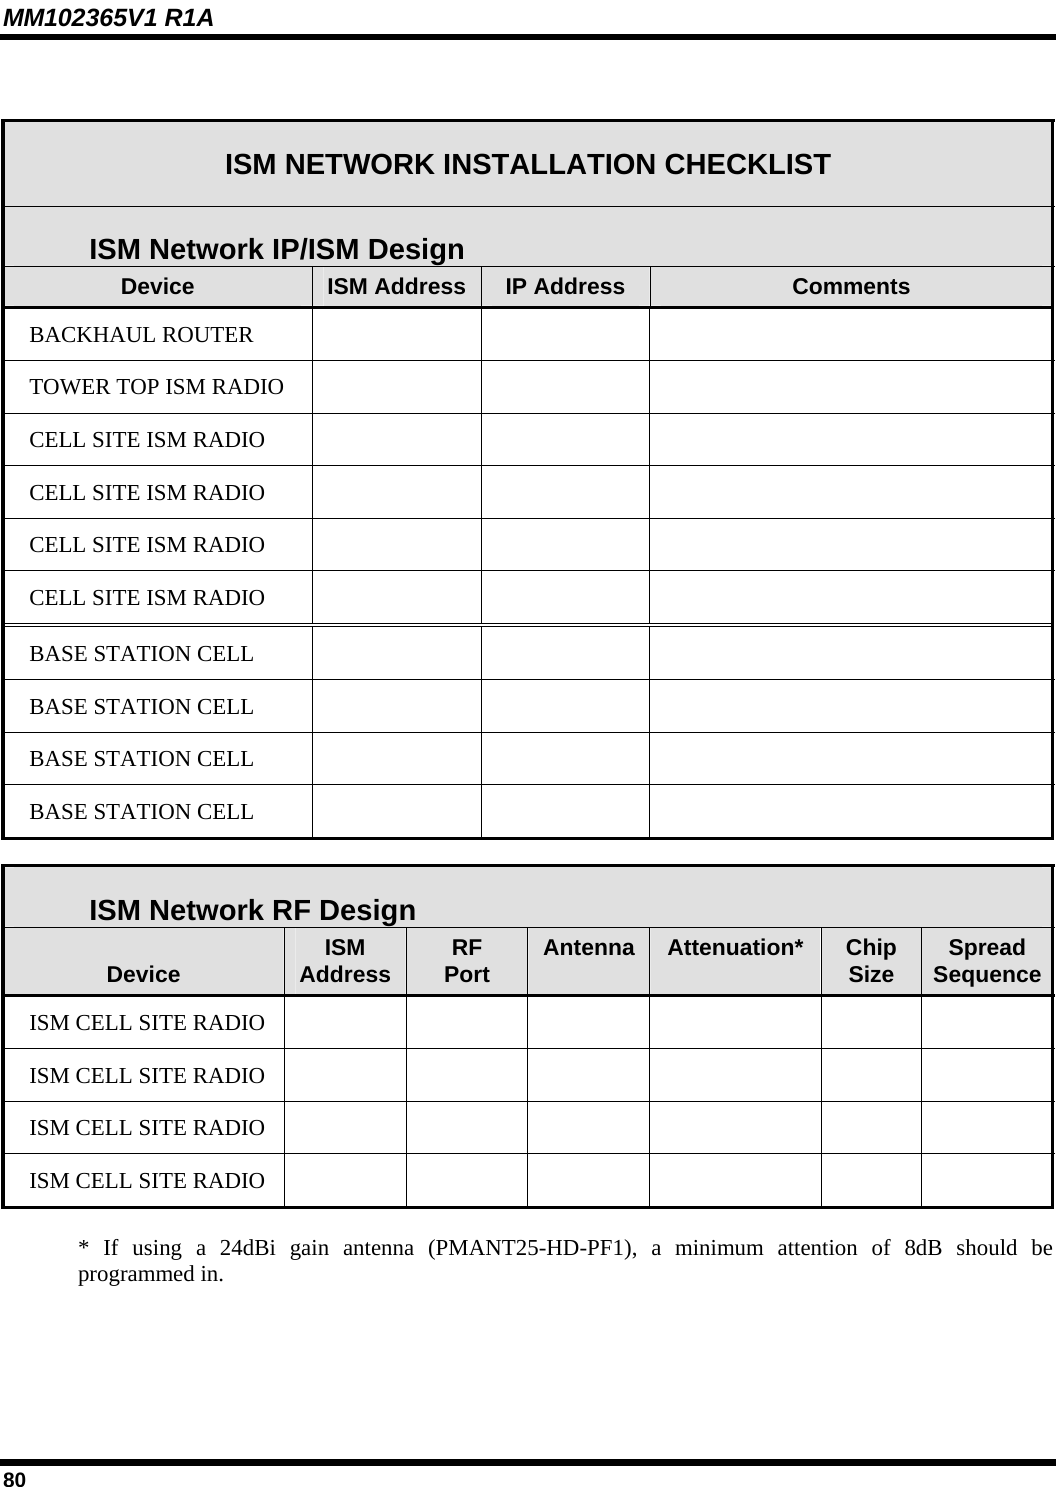 MM102365V1 R1A  ISM NETWORK INSTALLATION CHECKLIST ISM Network IP/ISM Design Device  ISM Address  IP Address  Comments BACKHAUL ROUTER     TOWER TOP ISM RADIO     CELL SITE ISM RADIO      CELL SITE ISM RADIO     CELL SITE ISM RADIO     CELL SITE ISM RADIO     BASE STATION CELL      BASE STATION CELL      BASE STATION CELL      BASE STATION CELL       ISM Network RF Design  Device  ISM Address  RF  Port  Antenna  Attenuation*  Chip  Size  Spread SequenceISM CELL SITE RADIO         ISM CELL SITE RADIO         ISM CELL SITE RADIO         ISM CELL SITE RADIO         * If using a 24dBi gain antenna (PMANT25-HD-PF1), a minimum attention of 8dB should be programmed in.  80 